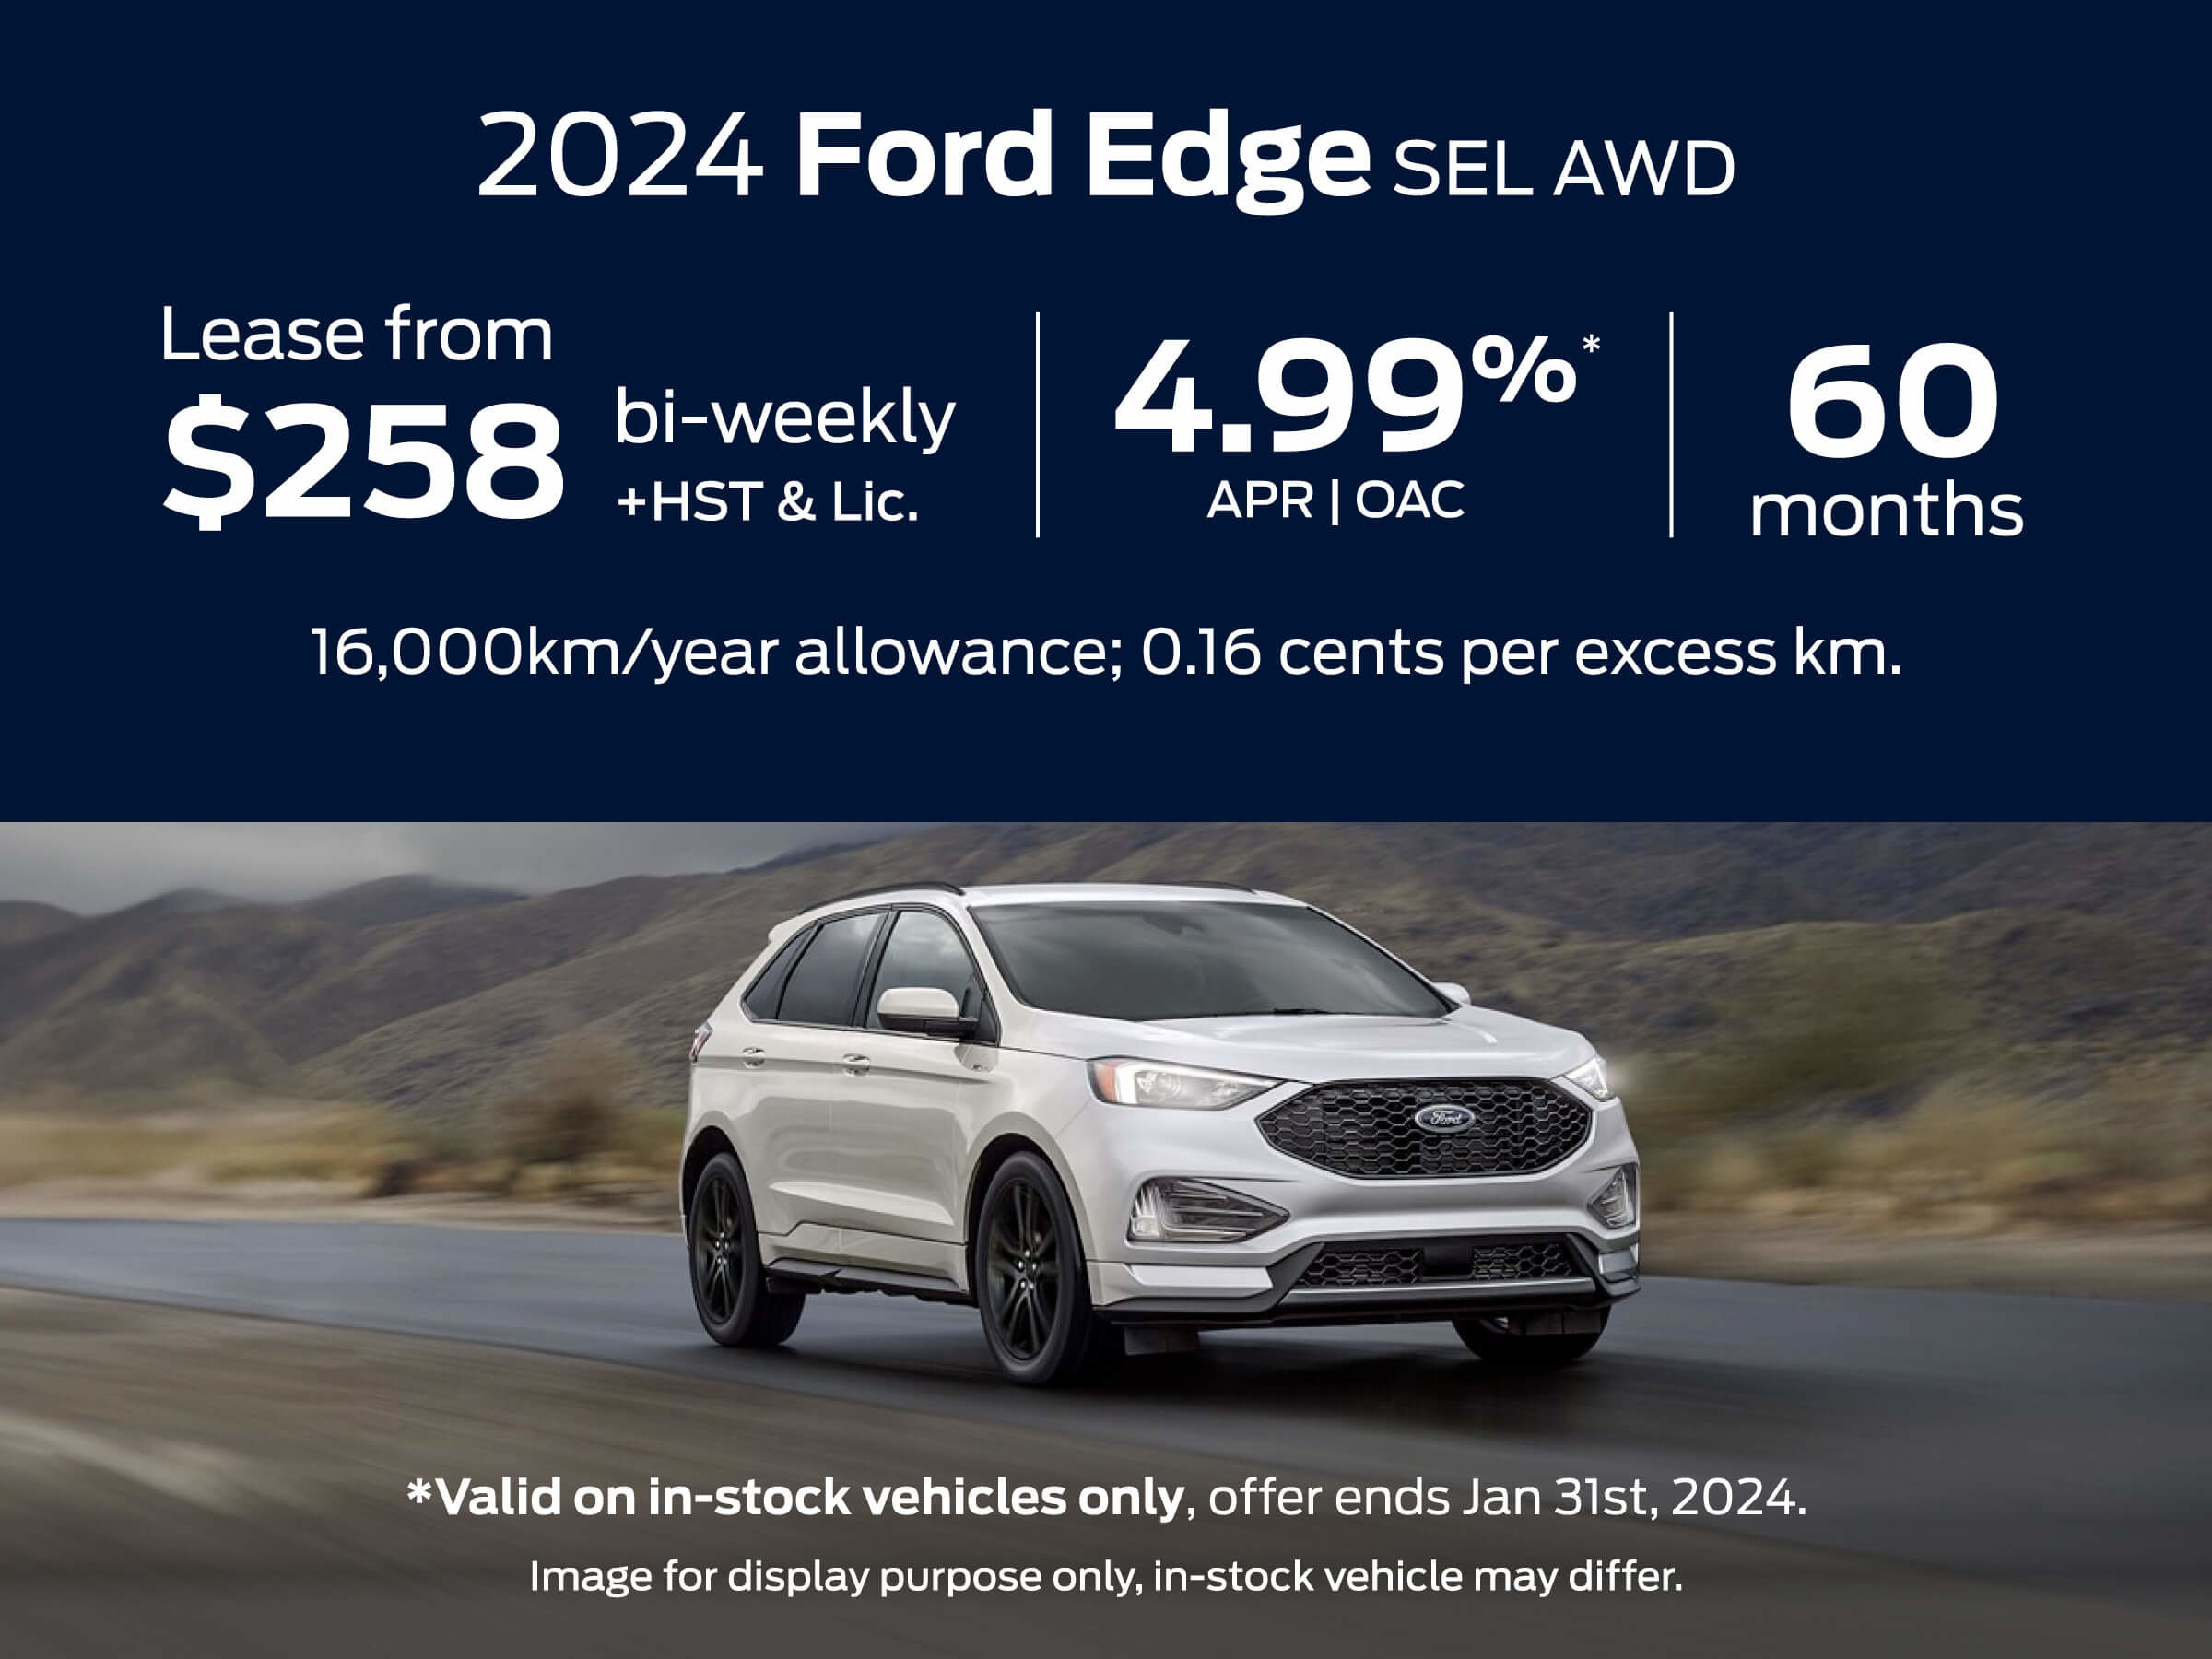 2024 Ford Edge Lease Offer Bayfield Ford in Barrie